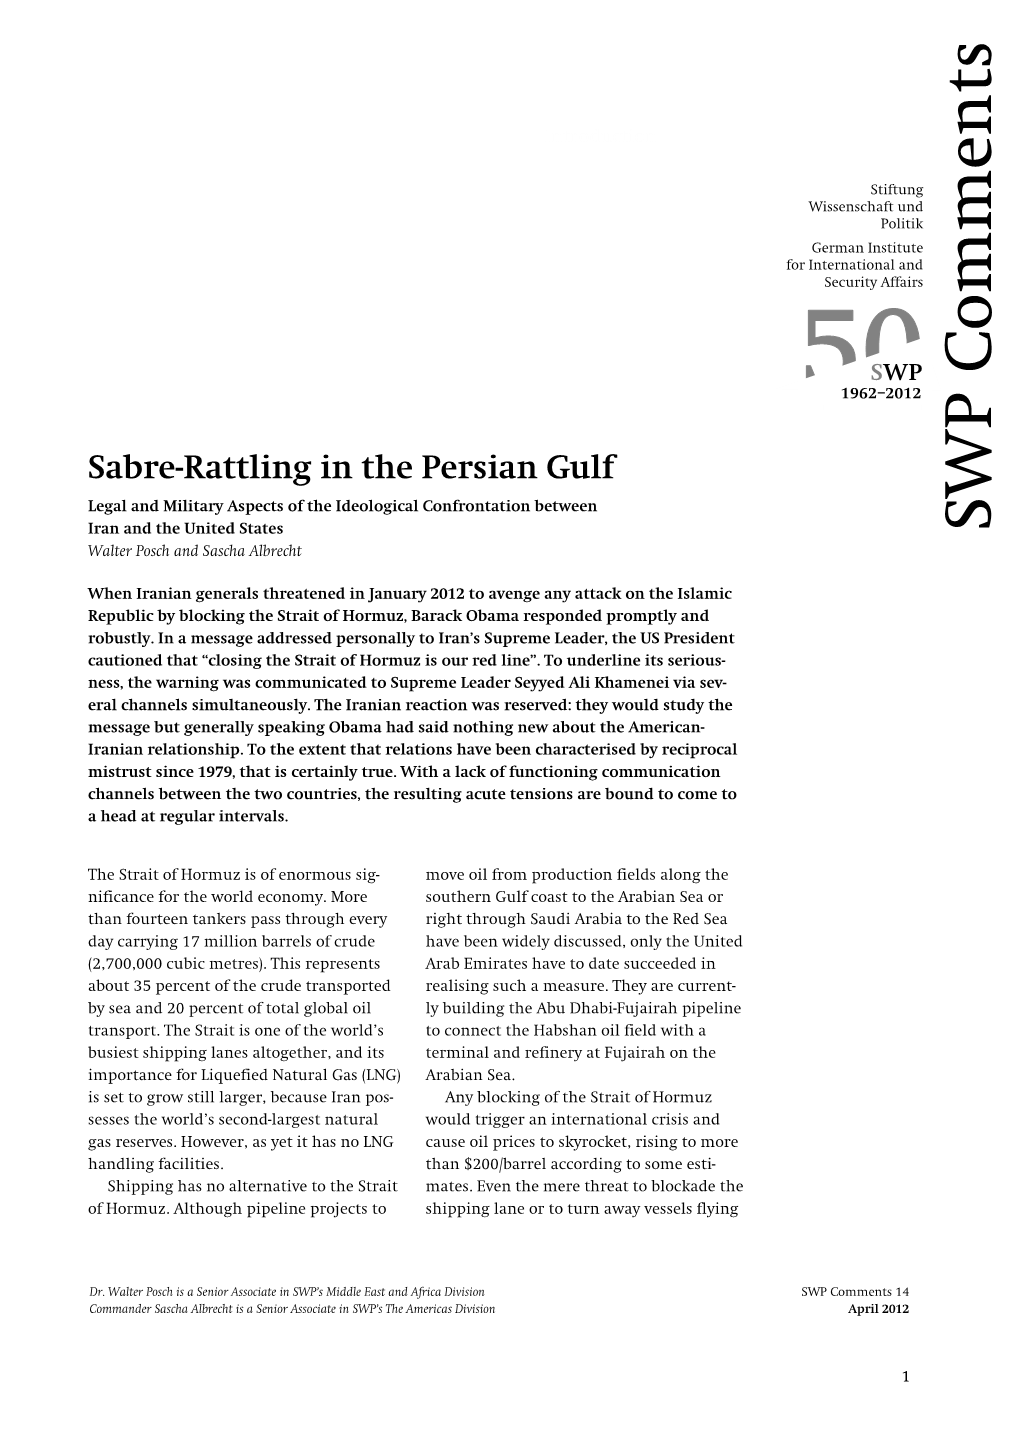 Sabre-Rattling in the Persian Gulf. Legal and Military Aspects of The